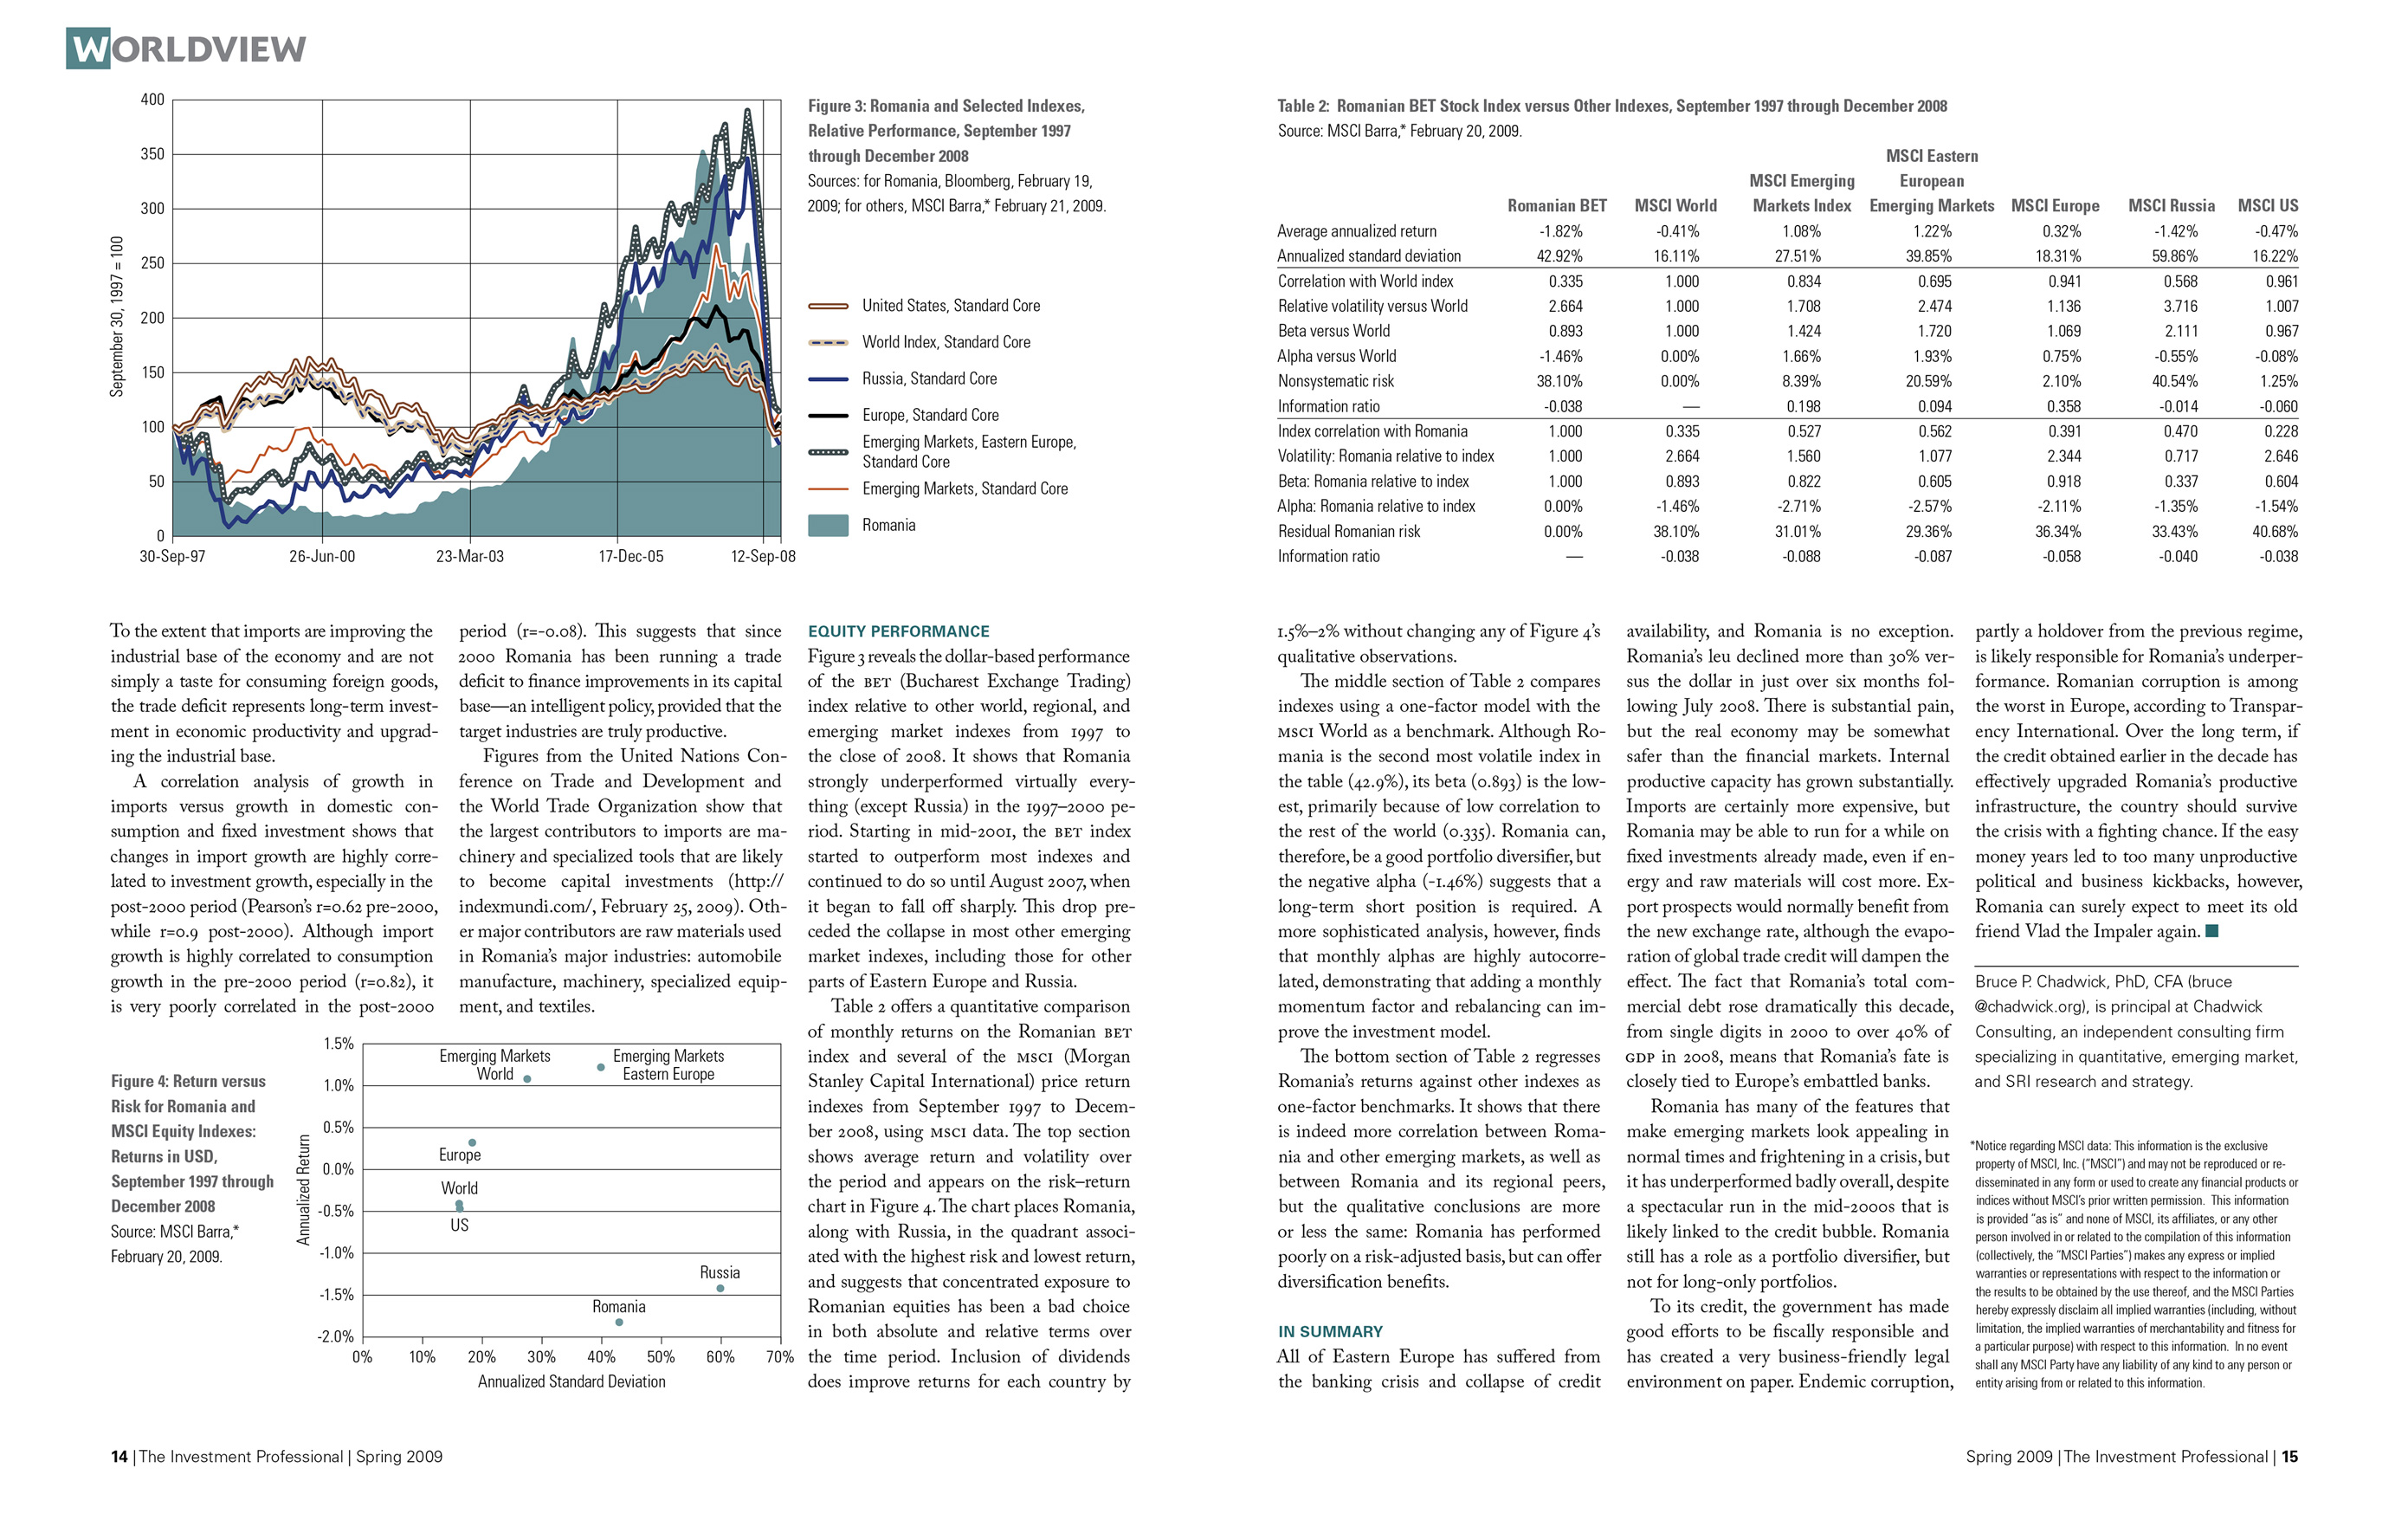 Second spread of the article titled 'On the Shores of the Black Sea.' A line graph in blue and brown plots the relative performance of Romania's index against selected indexes. A dot graph displays return versus risk for Romania and the MSCI Equity Index. A table compares the Romanian BET Stock Index with other indexes.